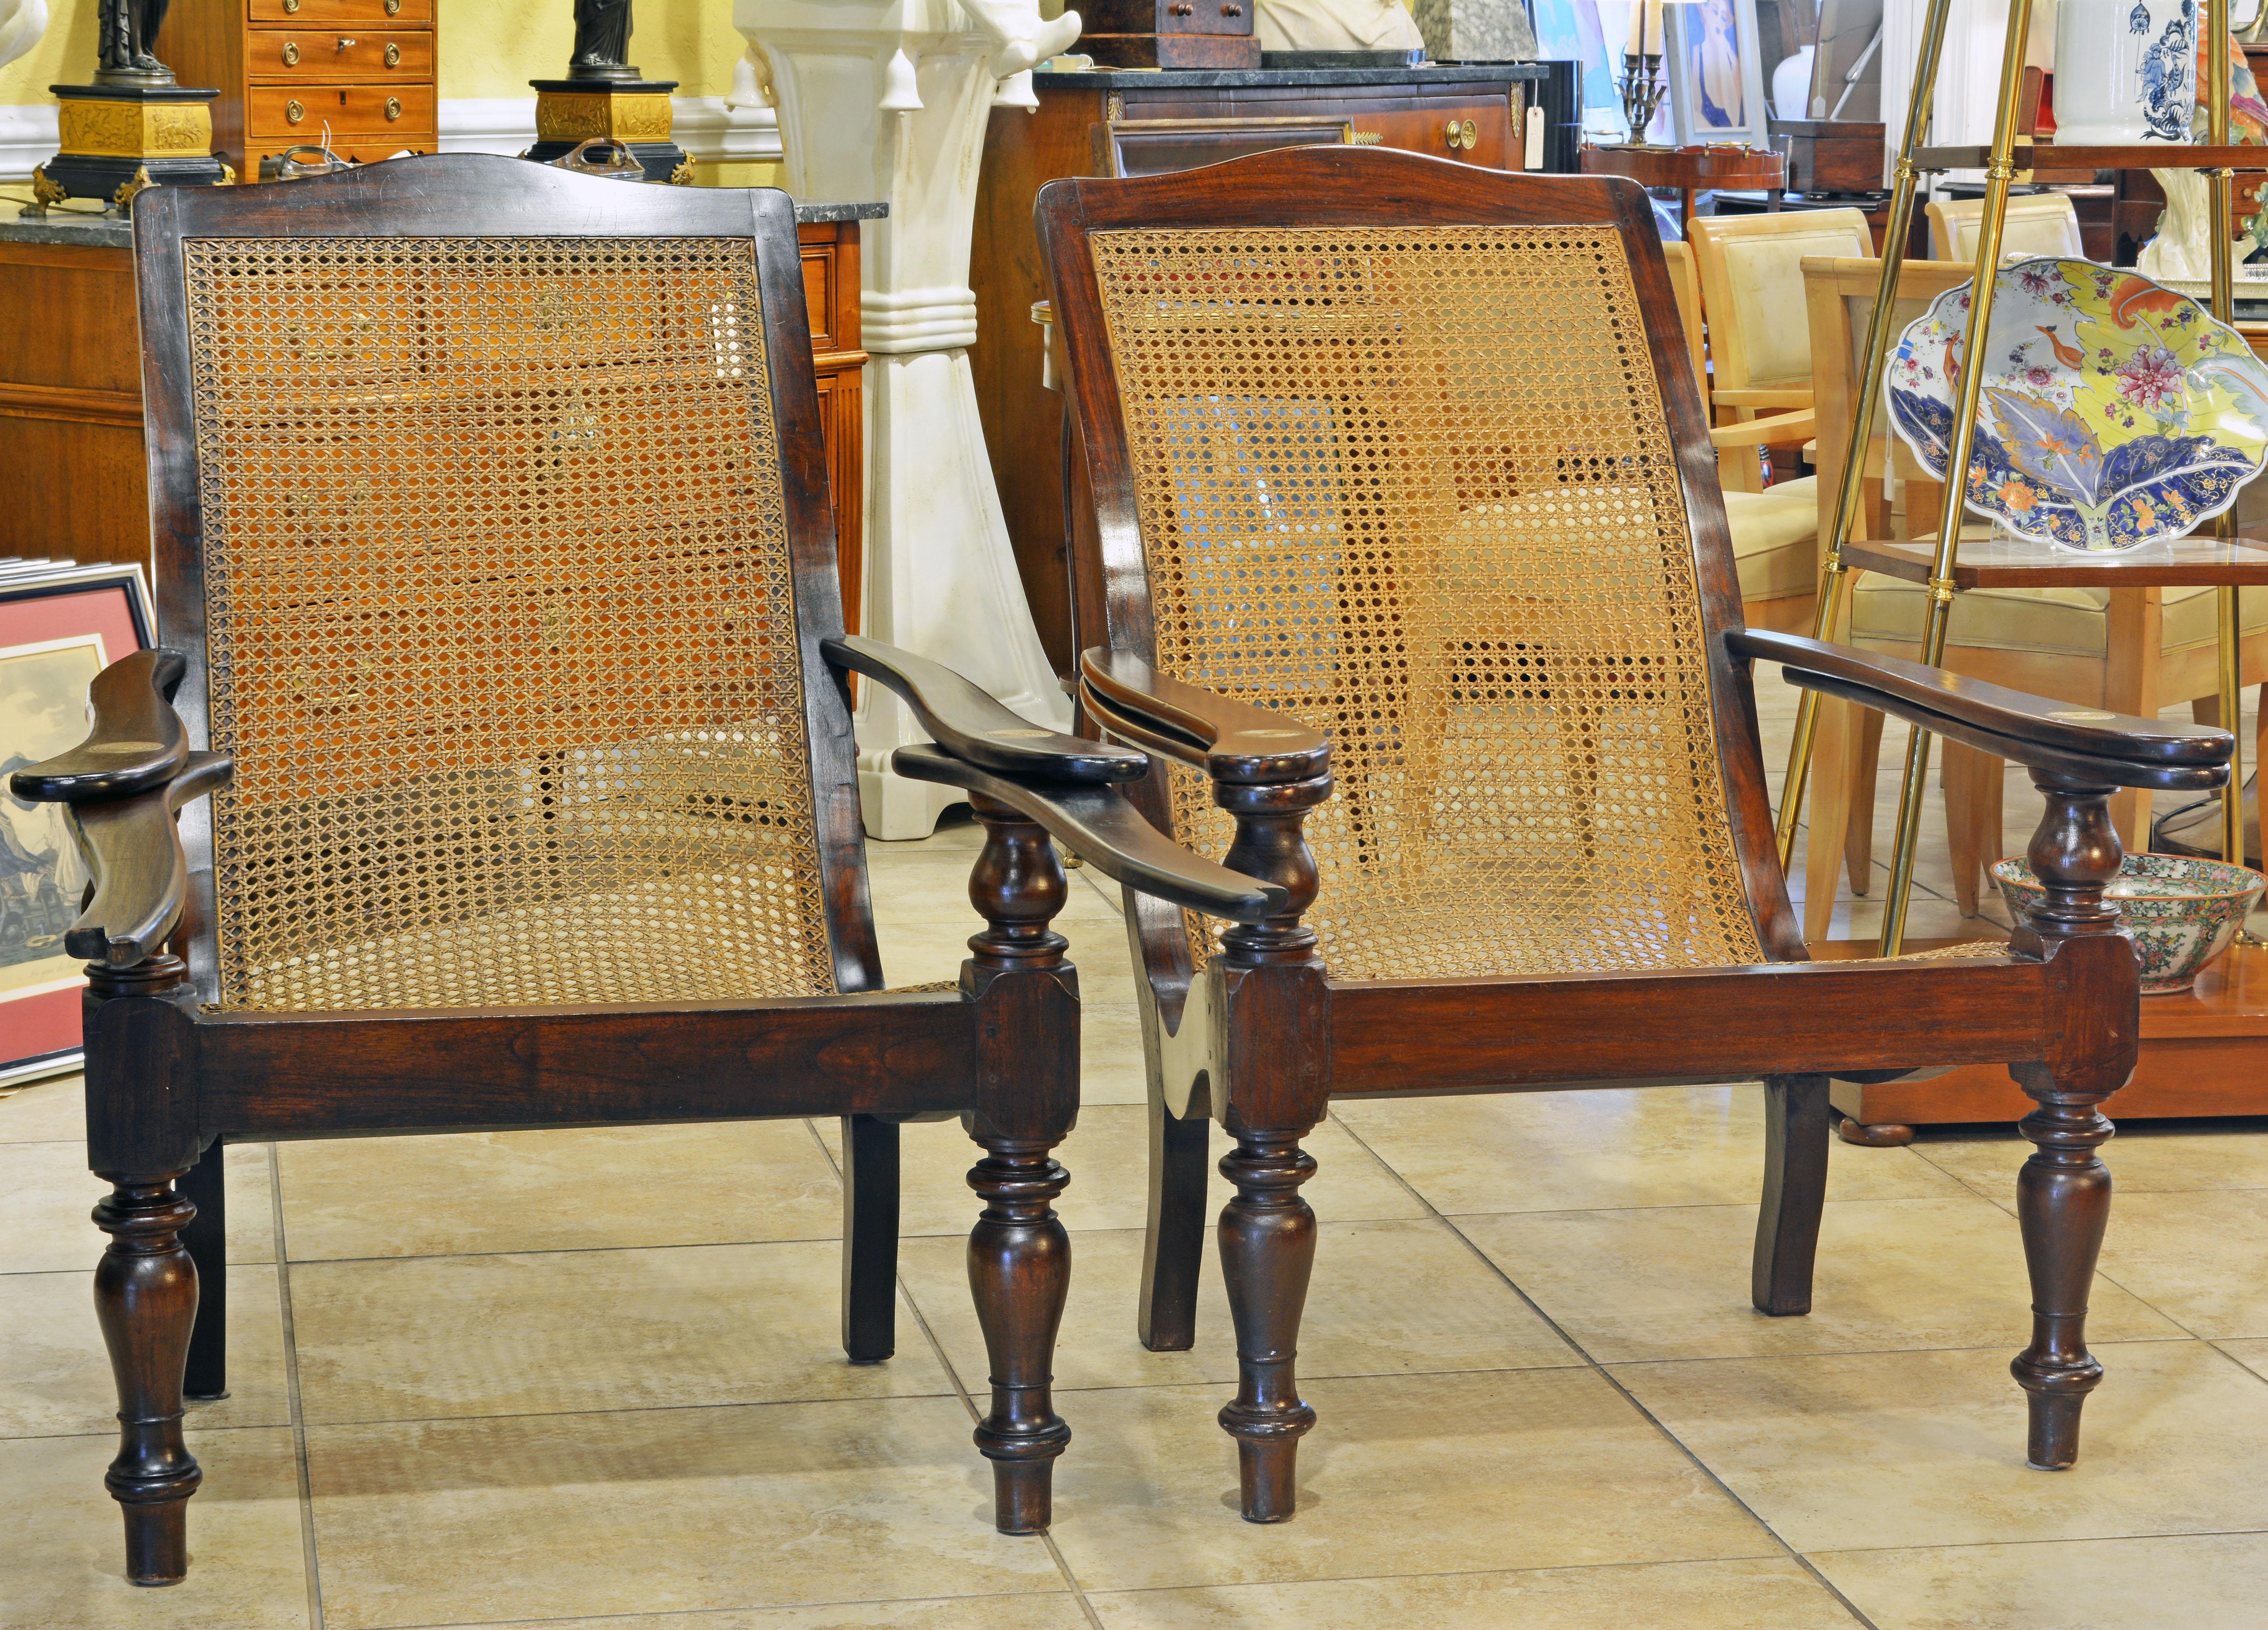 A charming and very British colonial pair of plantation or planter's chairs made of solid mahogany with decorative turnings and with caned seat and back in good condition. Part of the arrests swings out to form comfortable foot rests, all in the